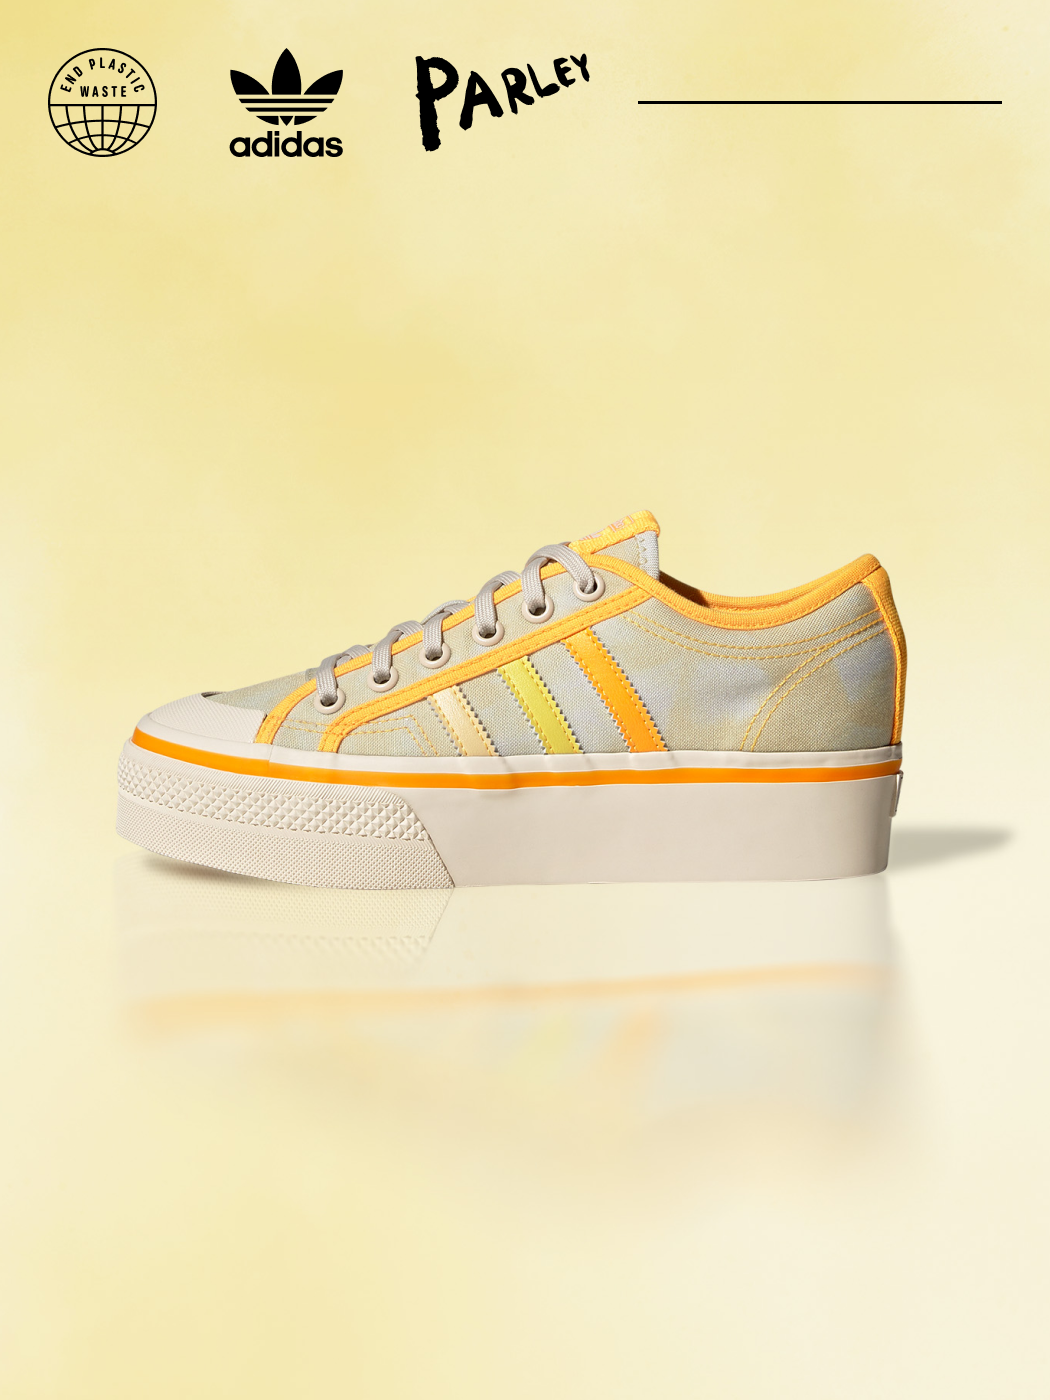 The Nizza sneaker in sun bleached yellow with orange 3-stripes is pictured from the side on a yellow background.